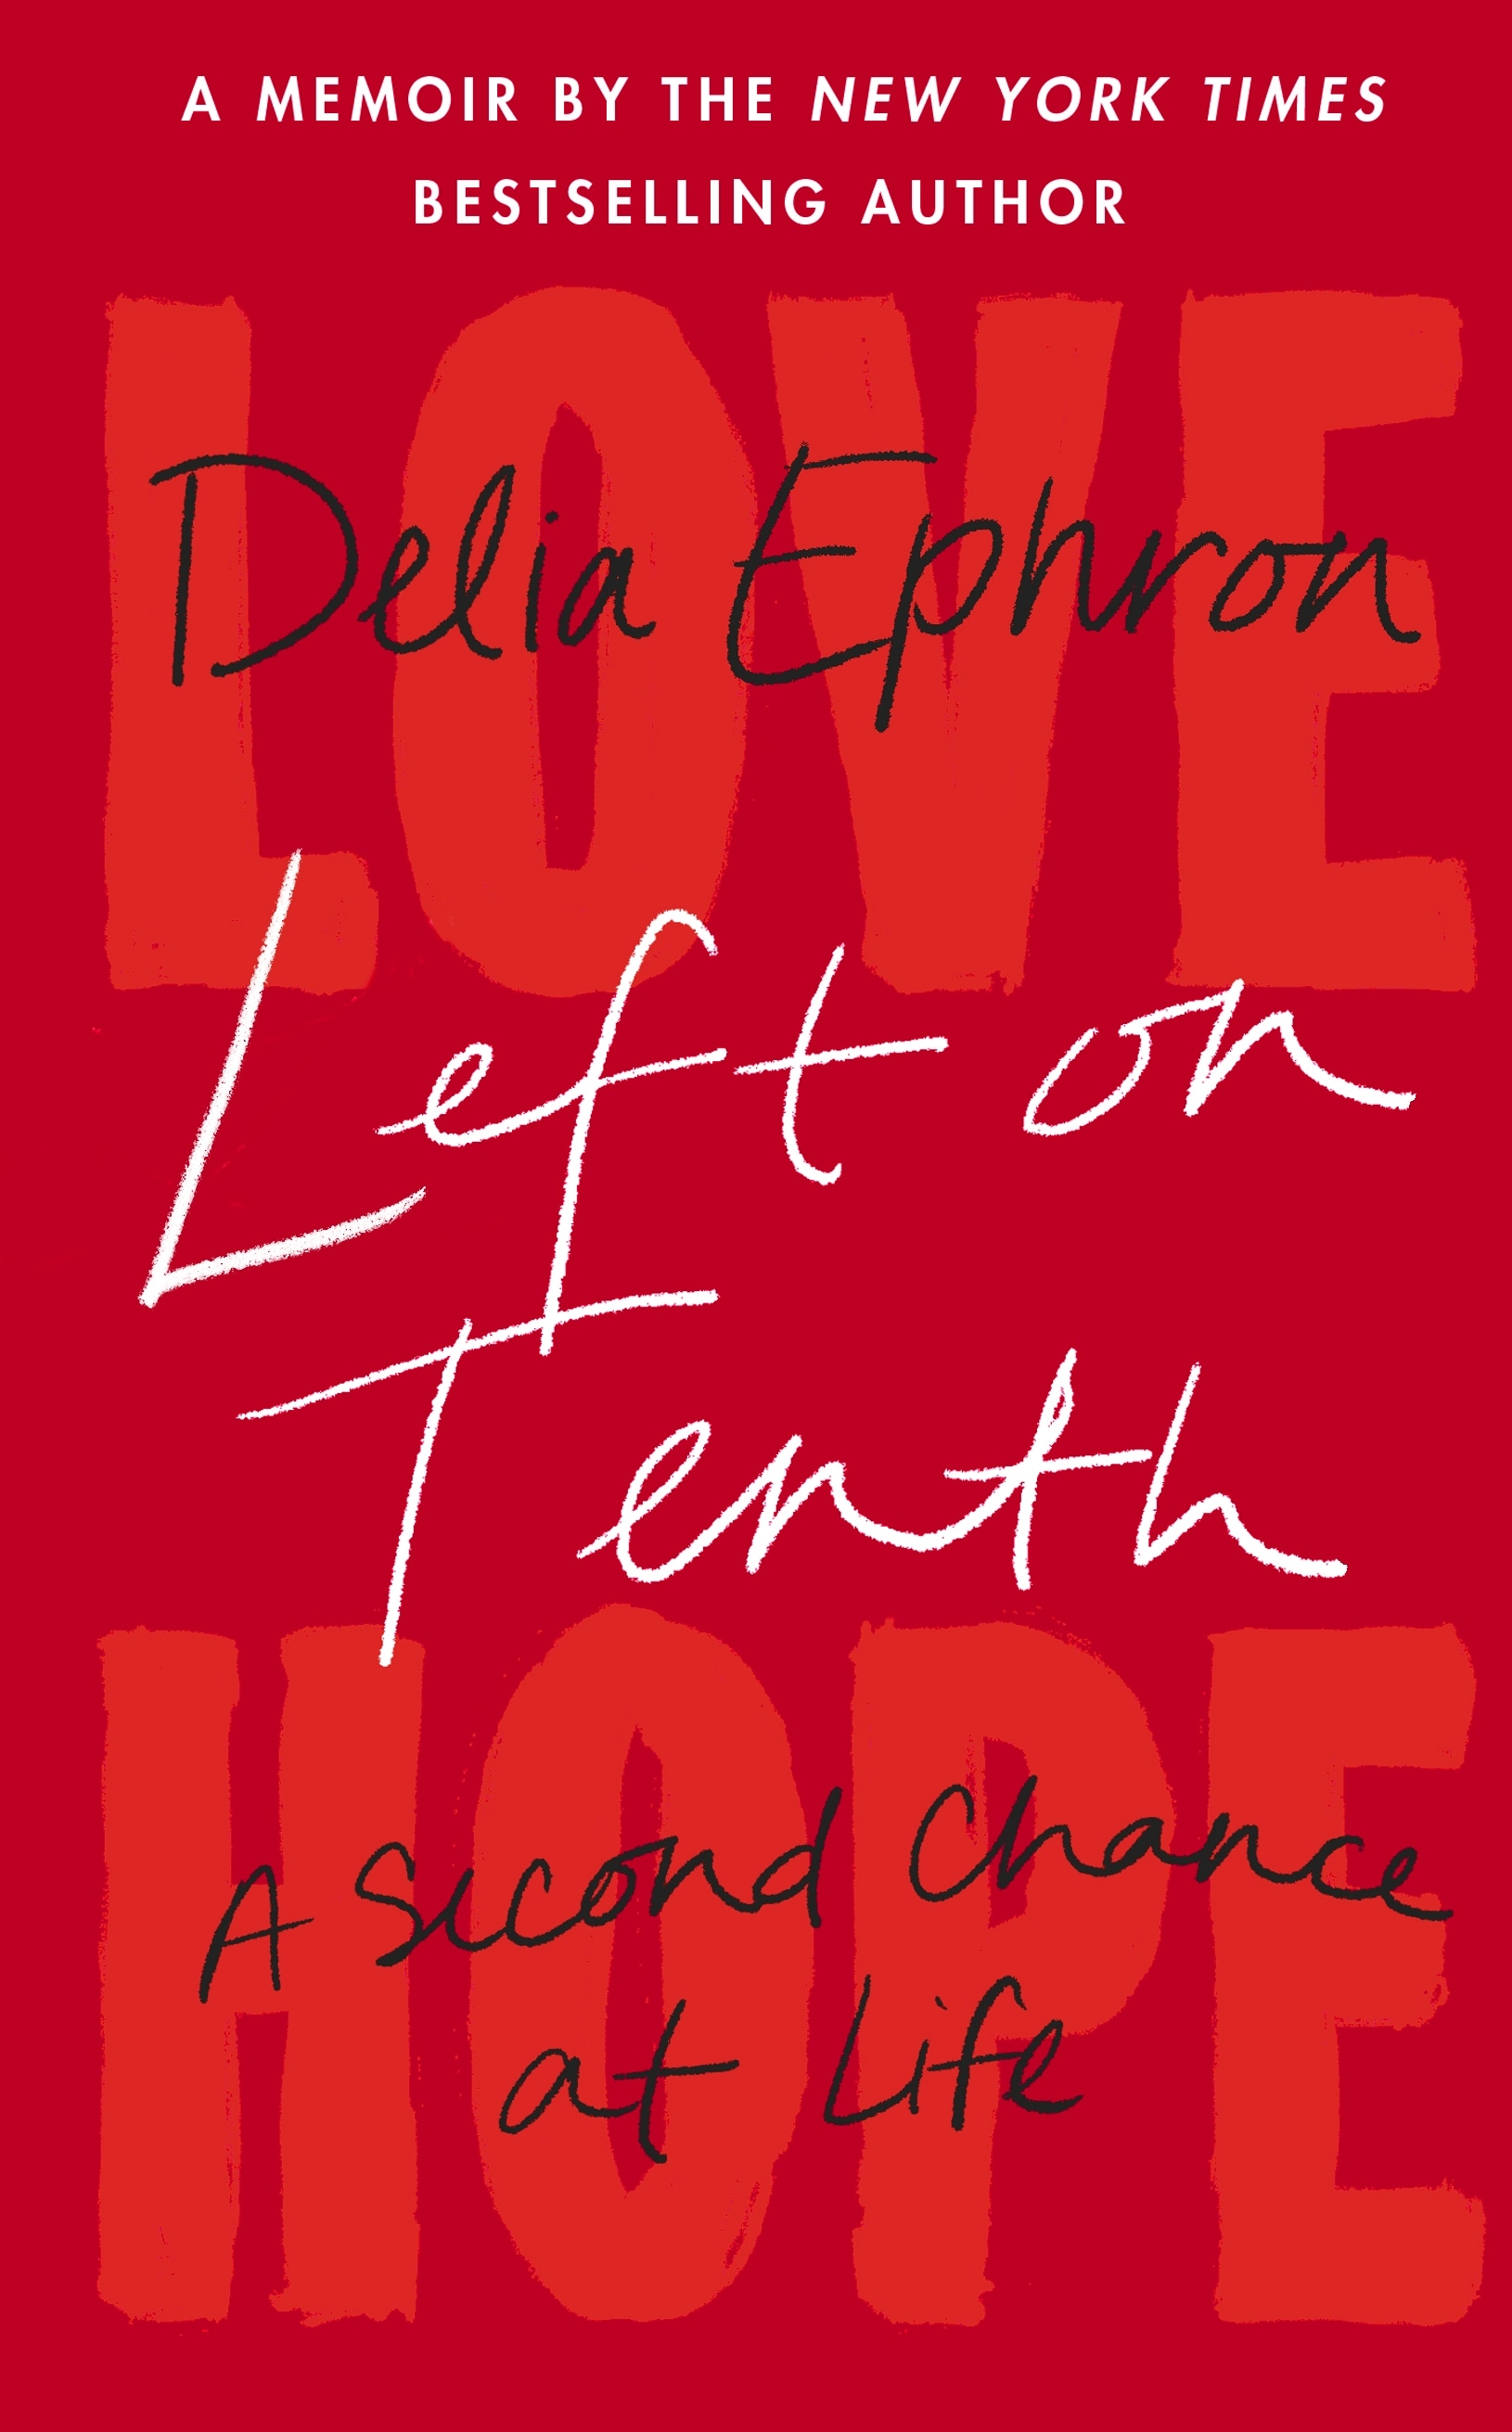 Book “Left on Tenth” by Delia Ephron — April 14, 2022